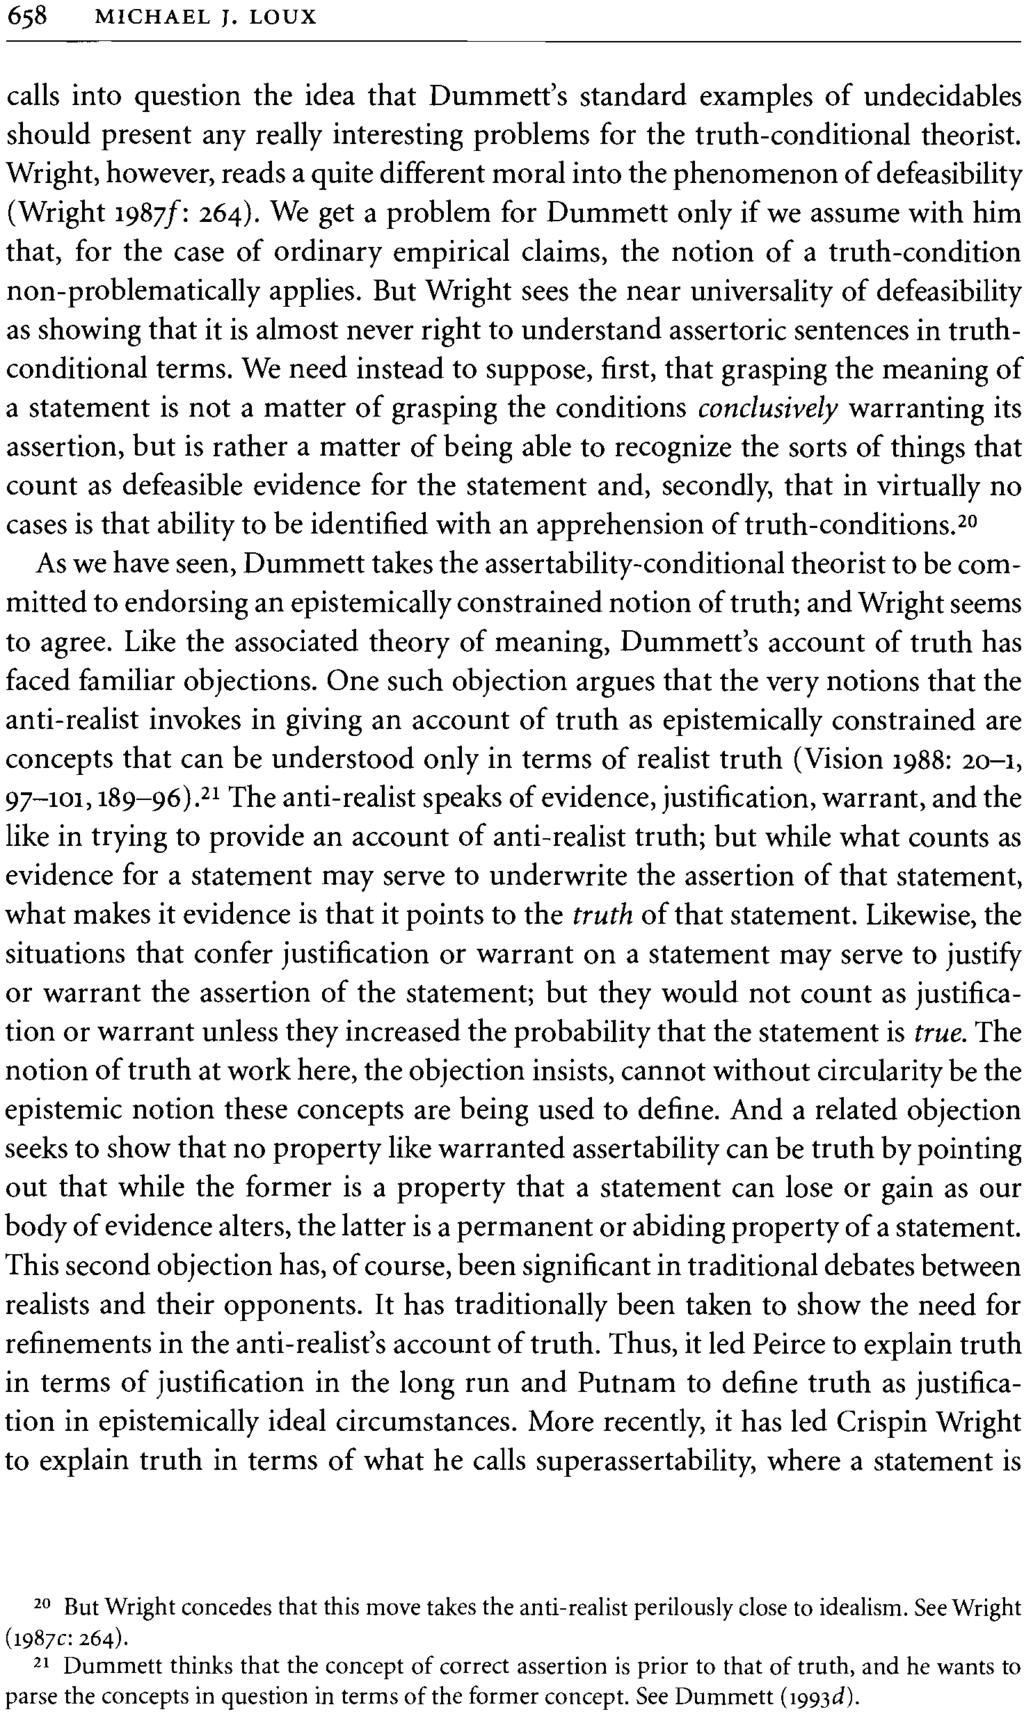 658 MICHAEL J. LOUX calls into question the idea that Dummett's standard examples of undecidables should present any really interesting problems for the truth-conditional theorist.